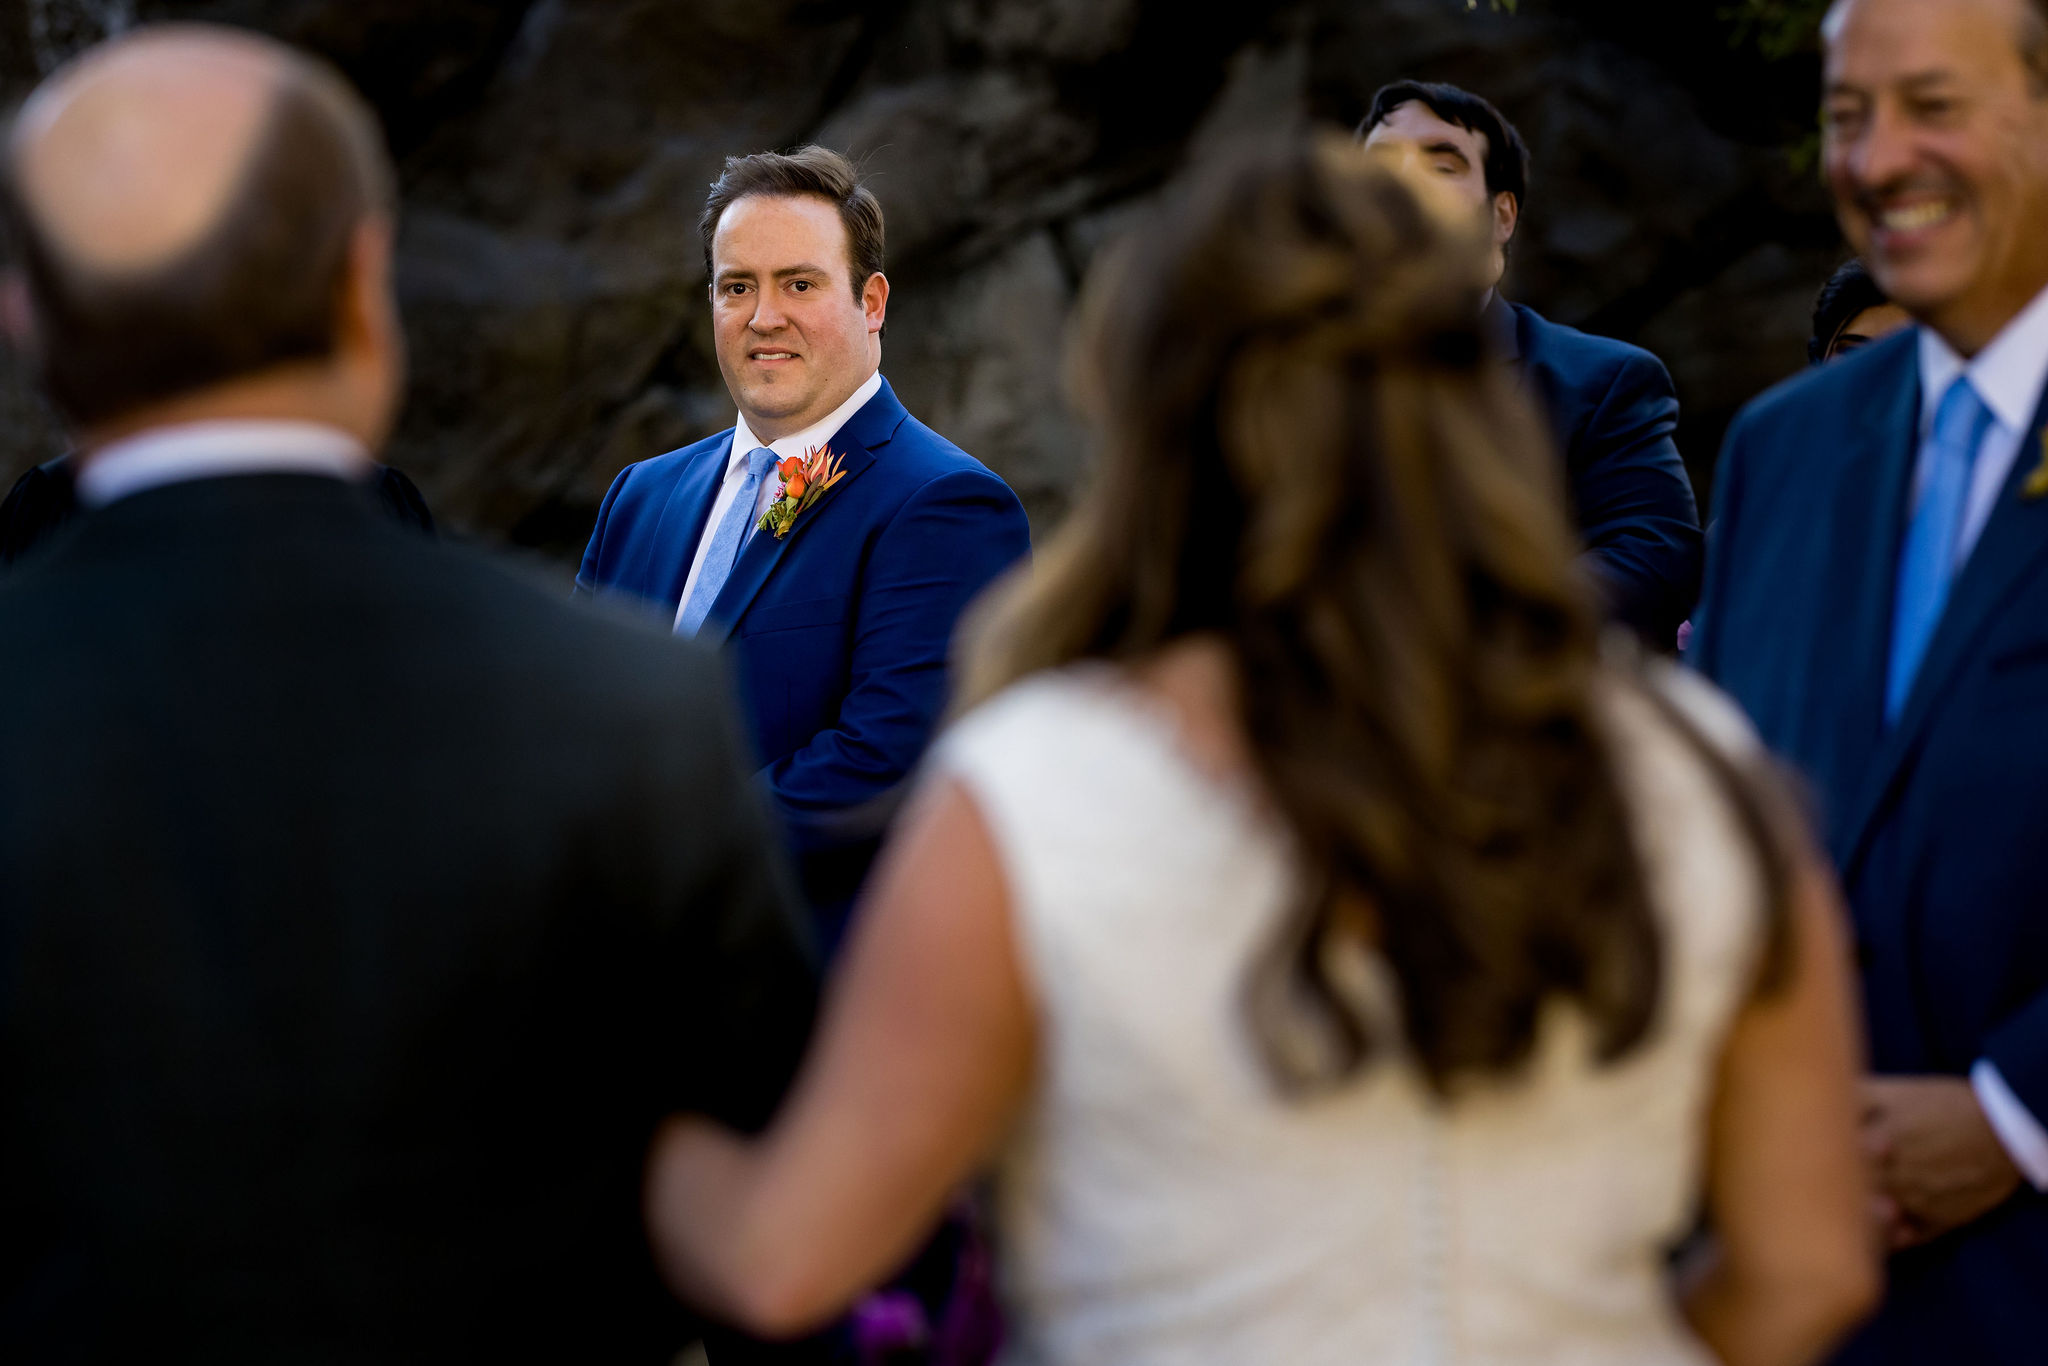 groom in bright blue suit watches bride walking down the aisle